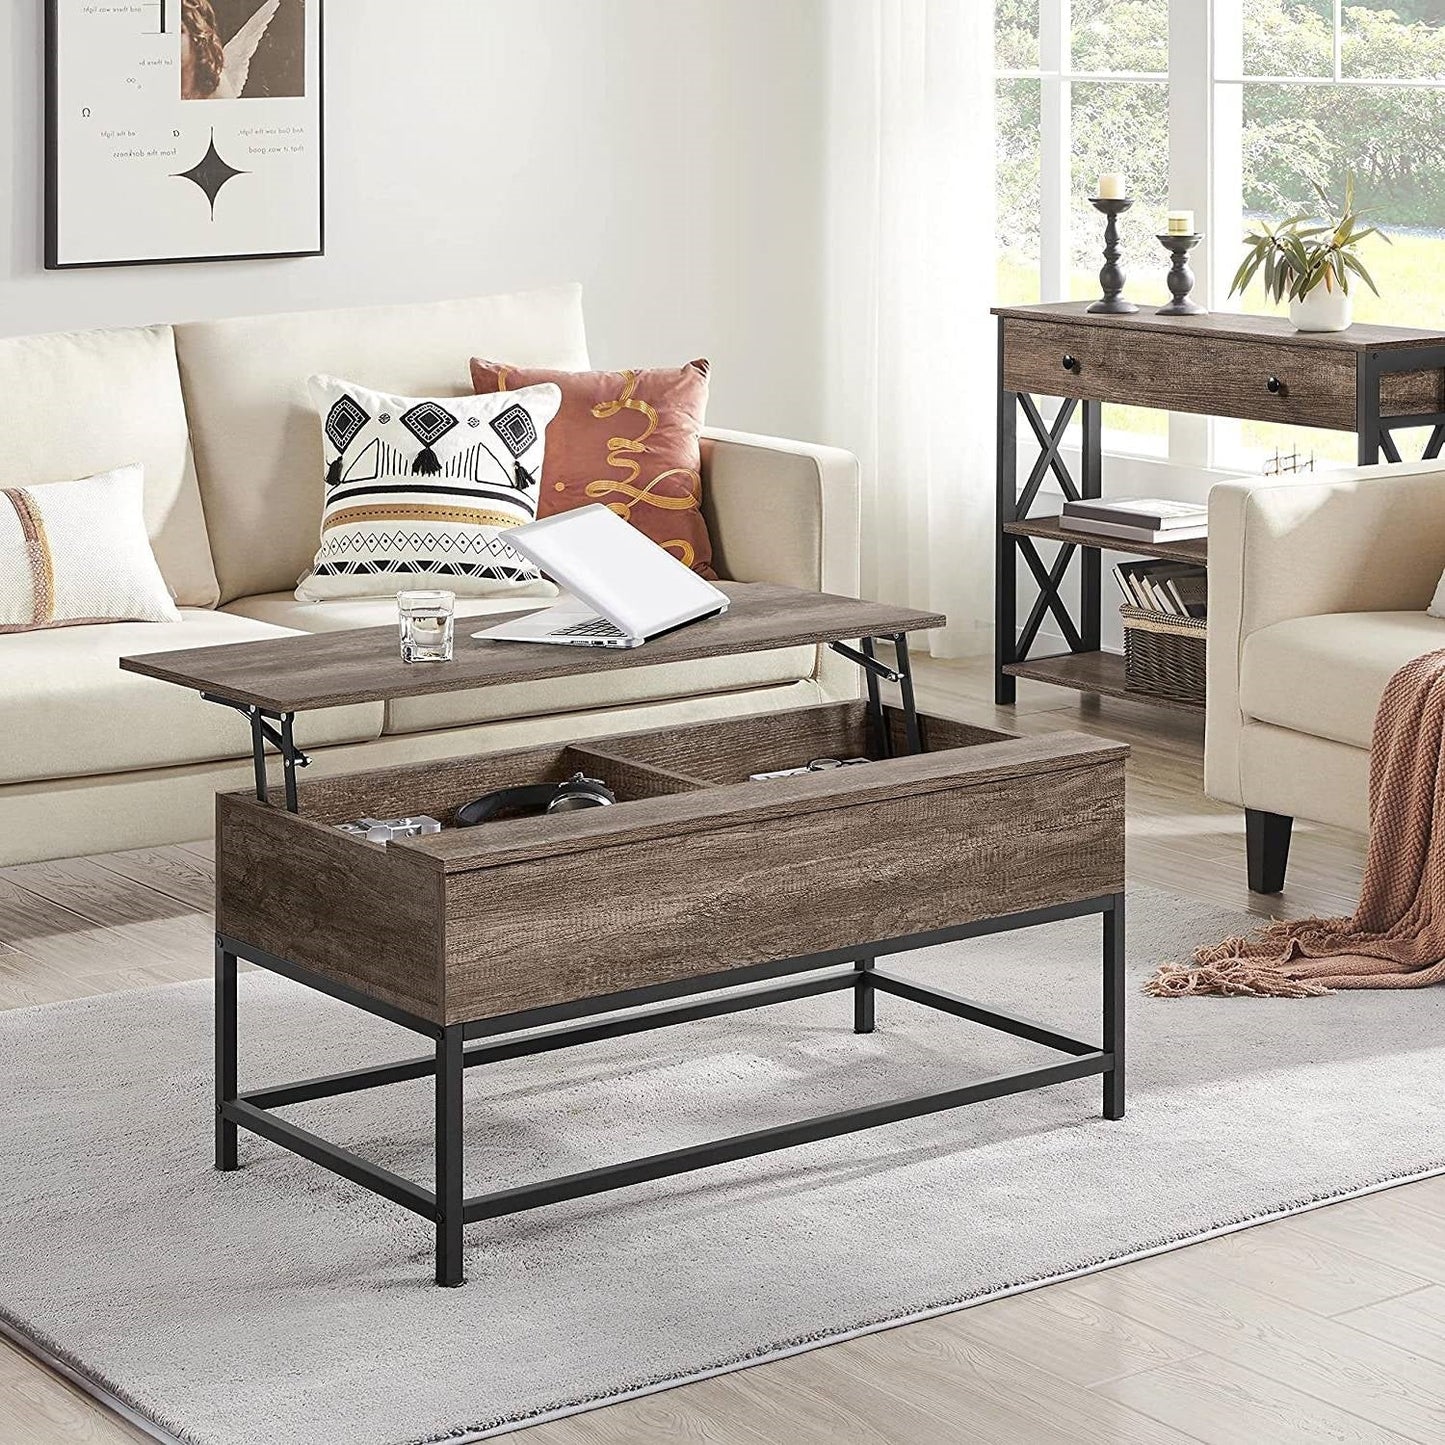 Living Room > Coffee Tables - Modern Metal Lift Top Coffee Table Sofa Laptop Desk With Rustic Taupe Wood Top